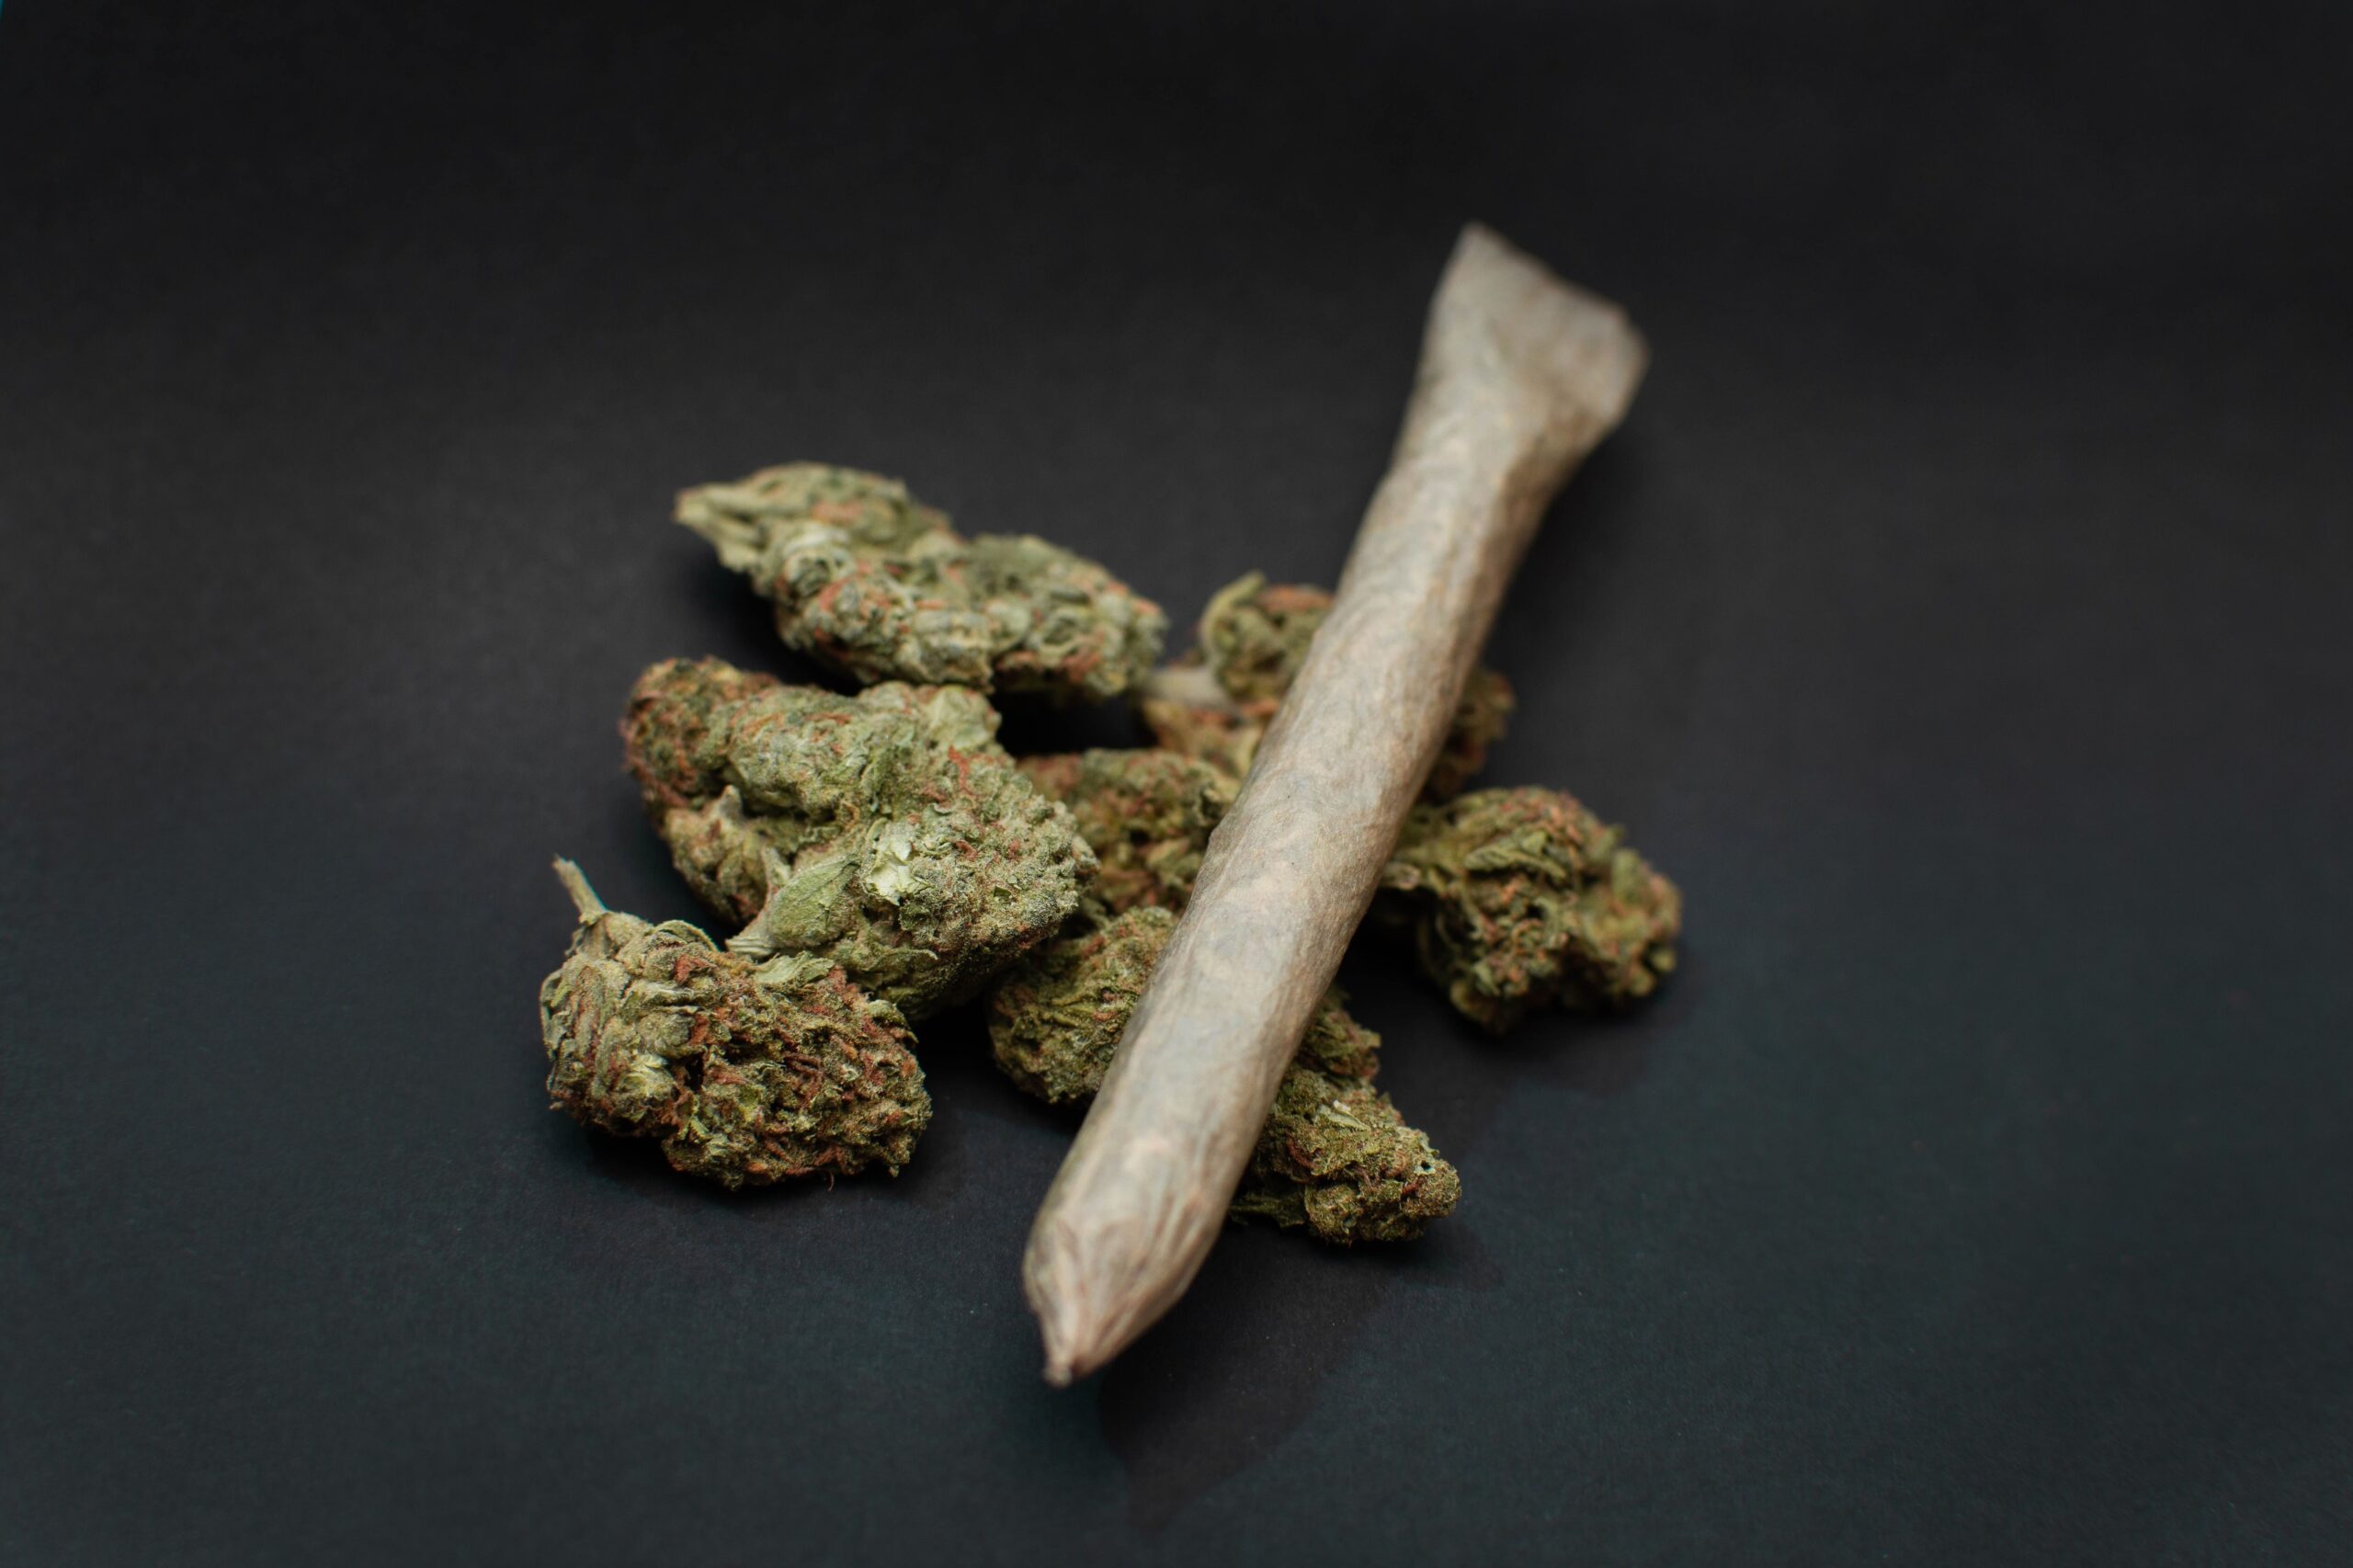 close-up-of-marijuana-buds-and-a-joint-on-a-black